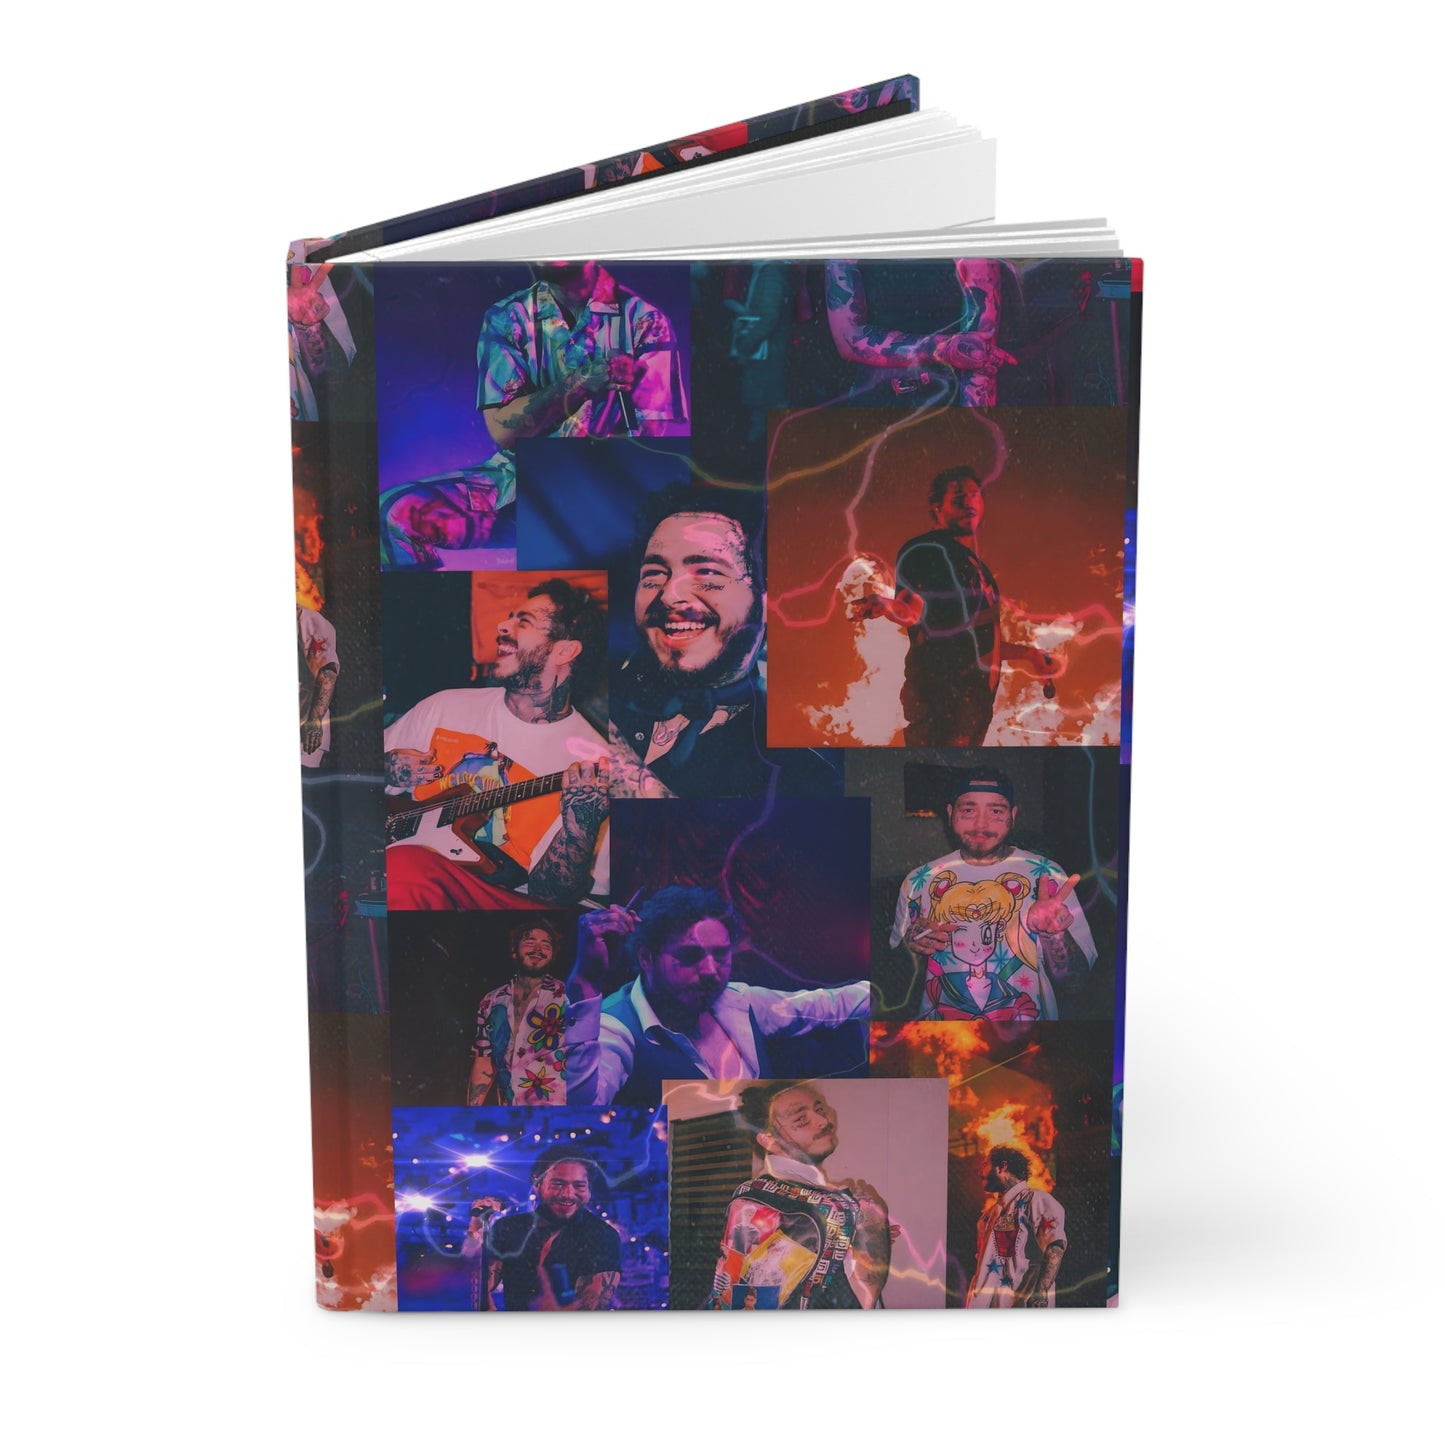 Post Malone Lightning Photo Collage Hardcover Journal